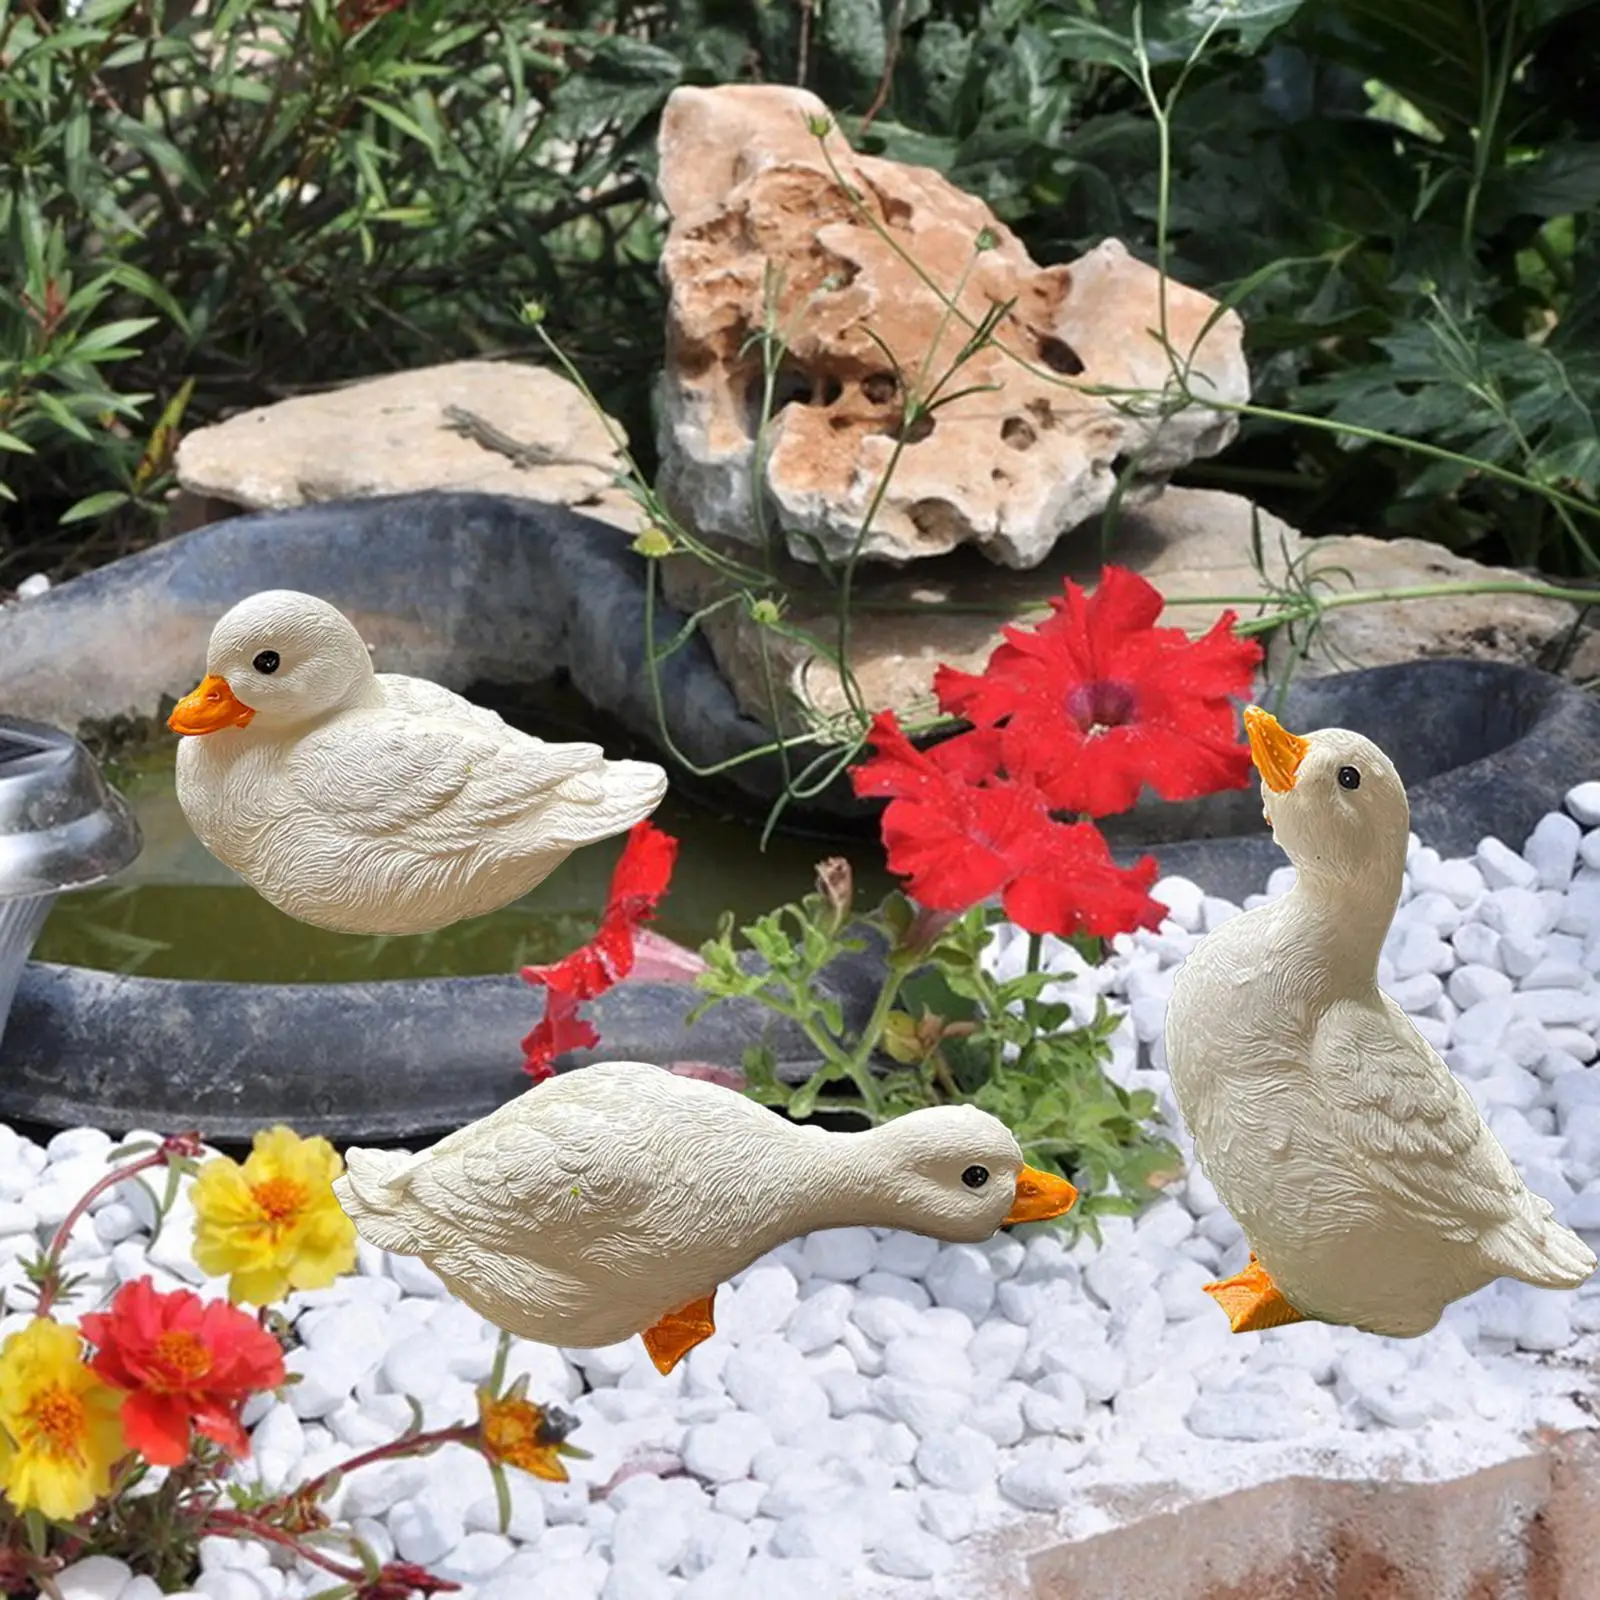 3x Resin Statues Small Duck Statues Home Decor for Landscaping Room Office